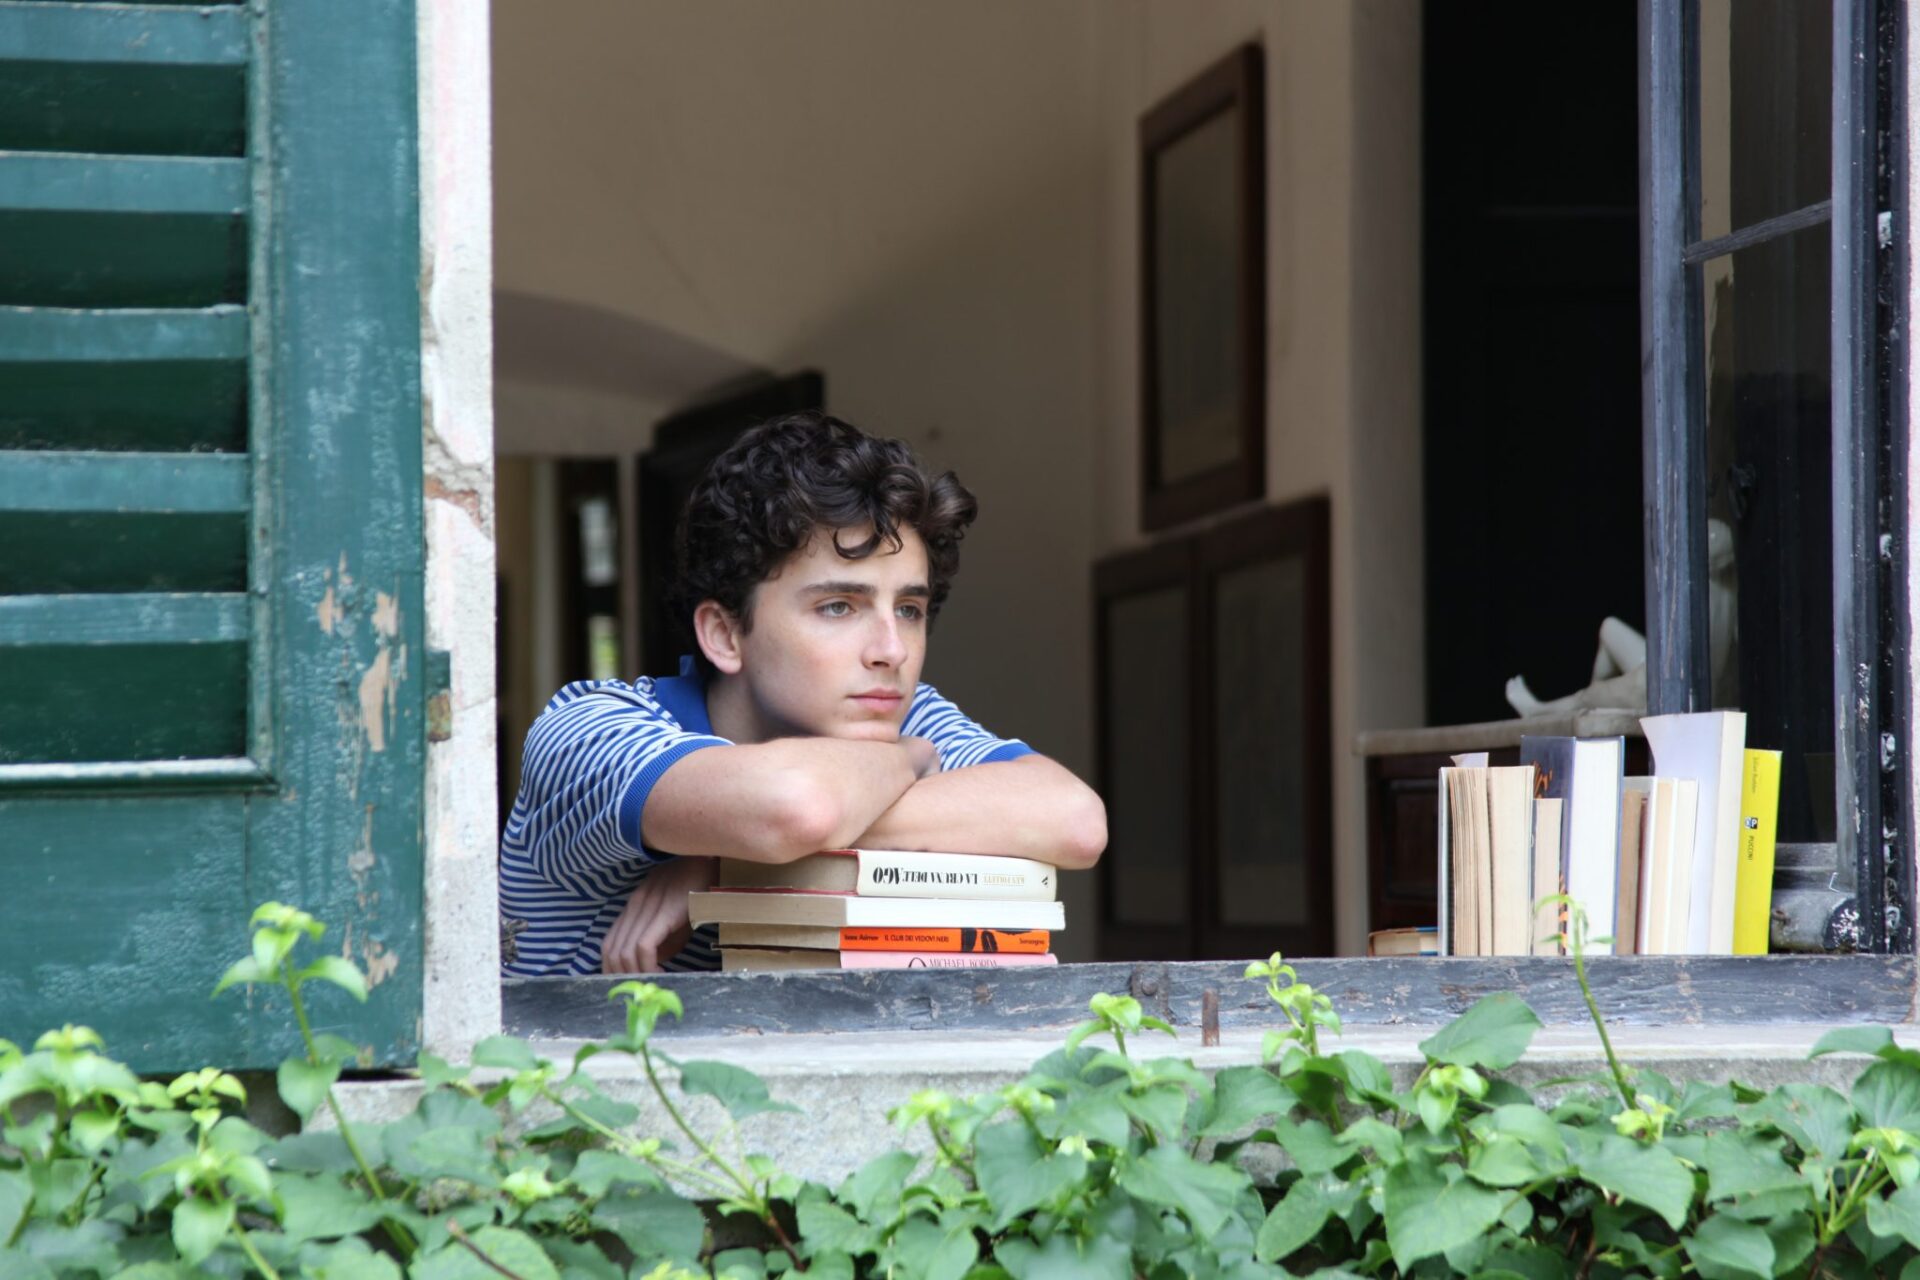 ‘Call Me By Your Name’ is an exquisite and painful look at first love